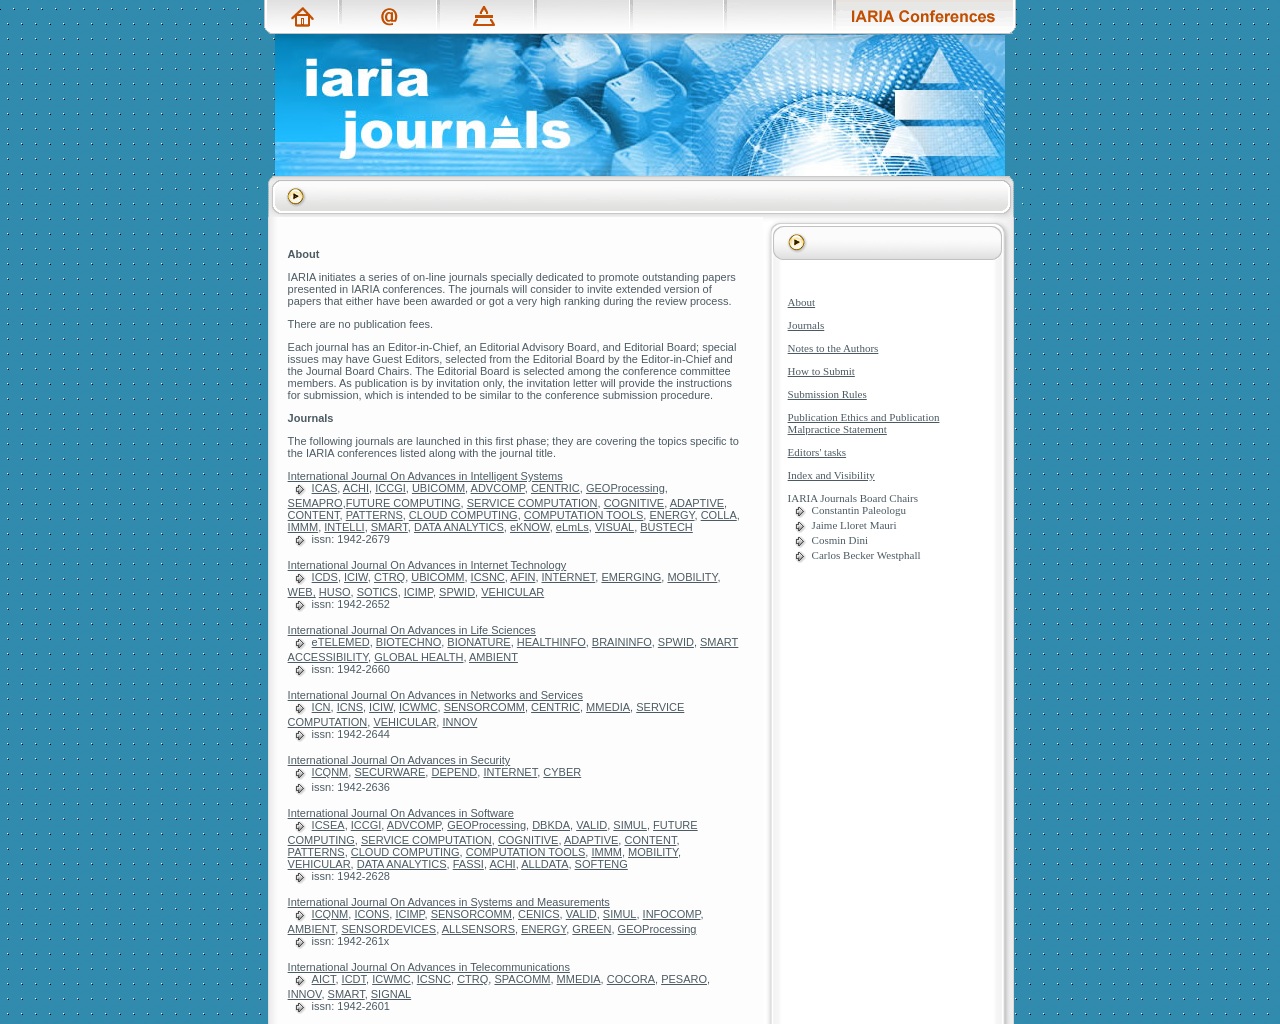 iariajournals.org